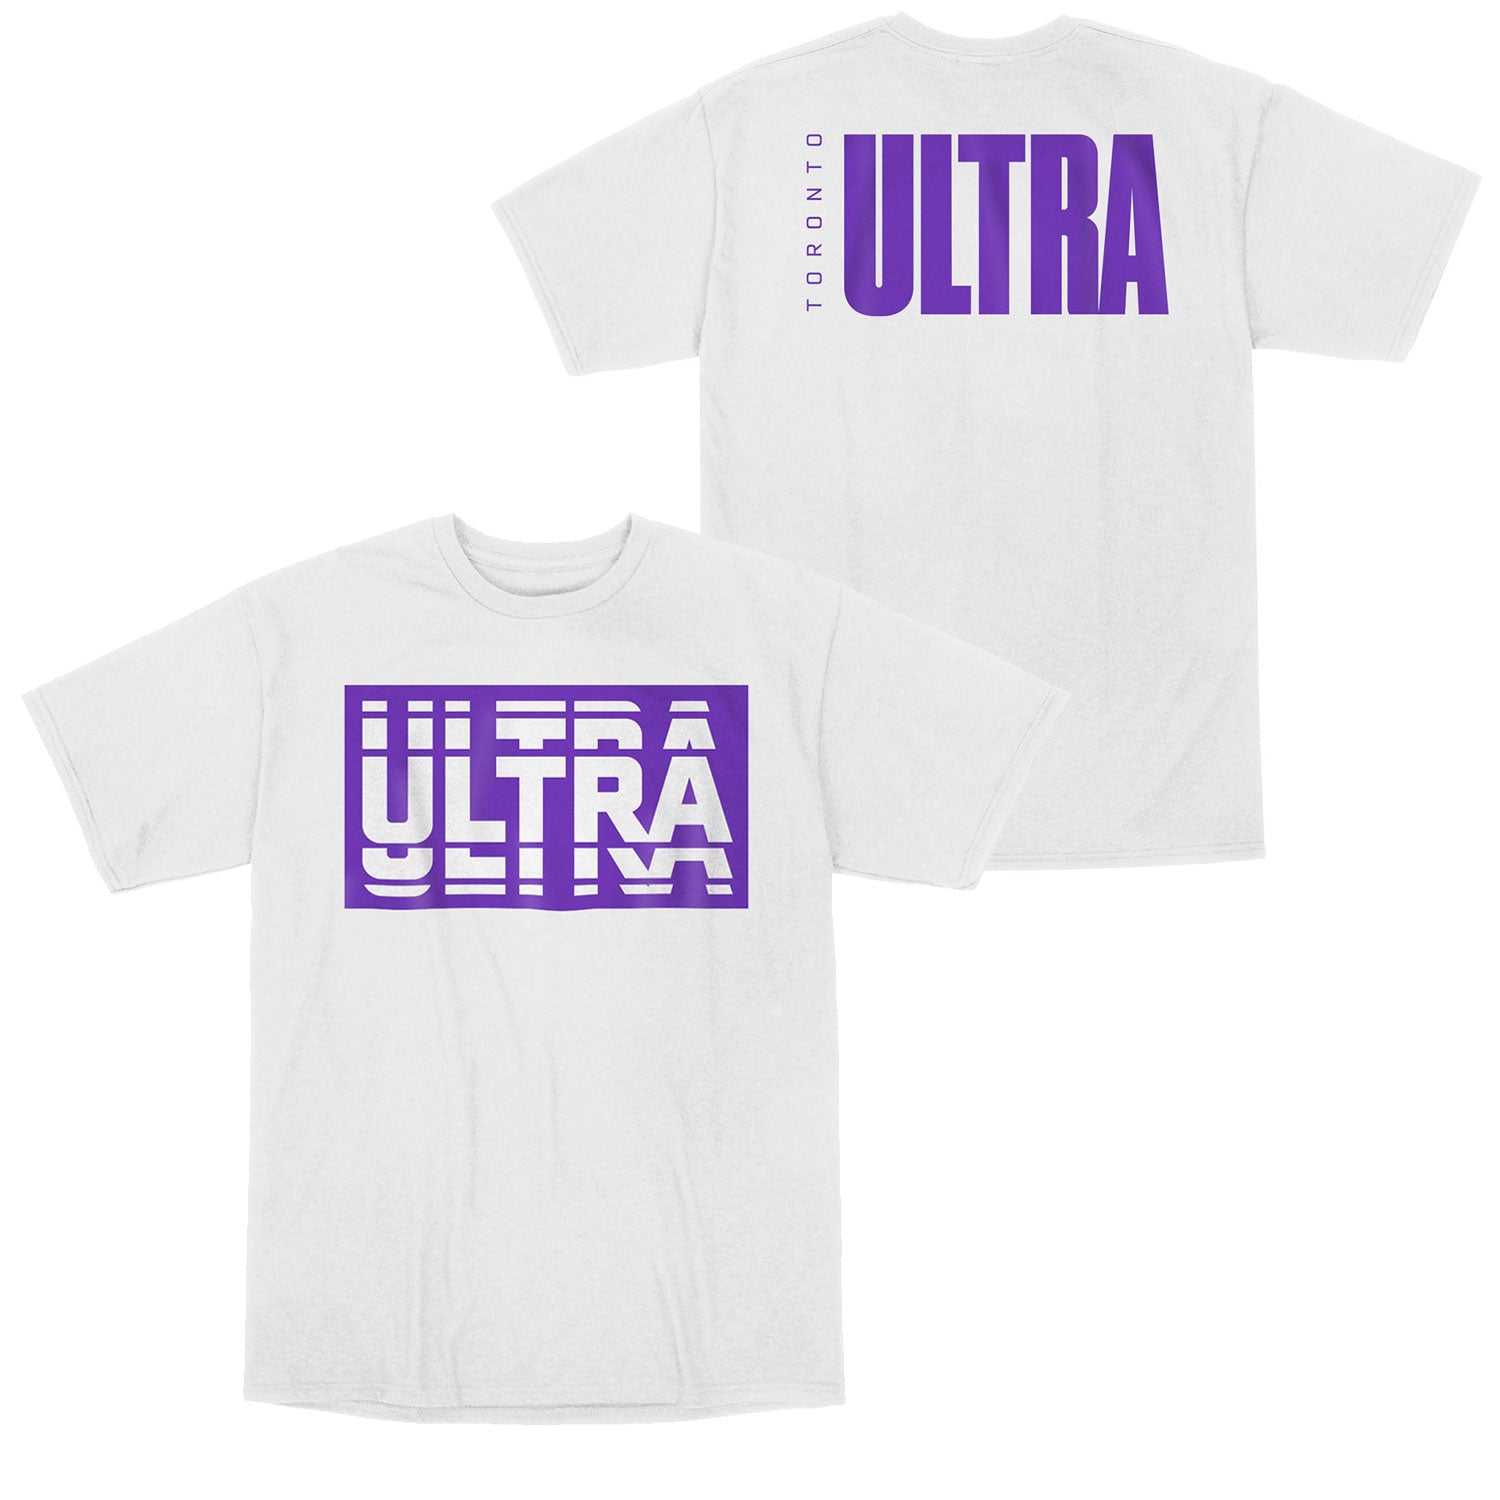 Toronto Ulta Native White T-Shirt - Front and Back View